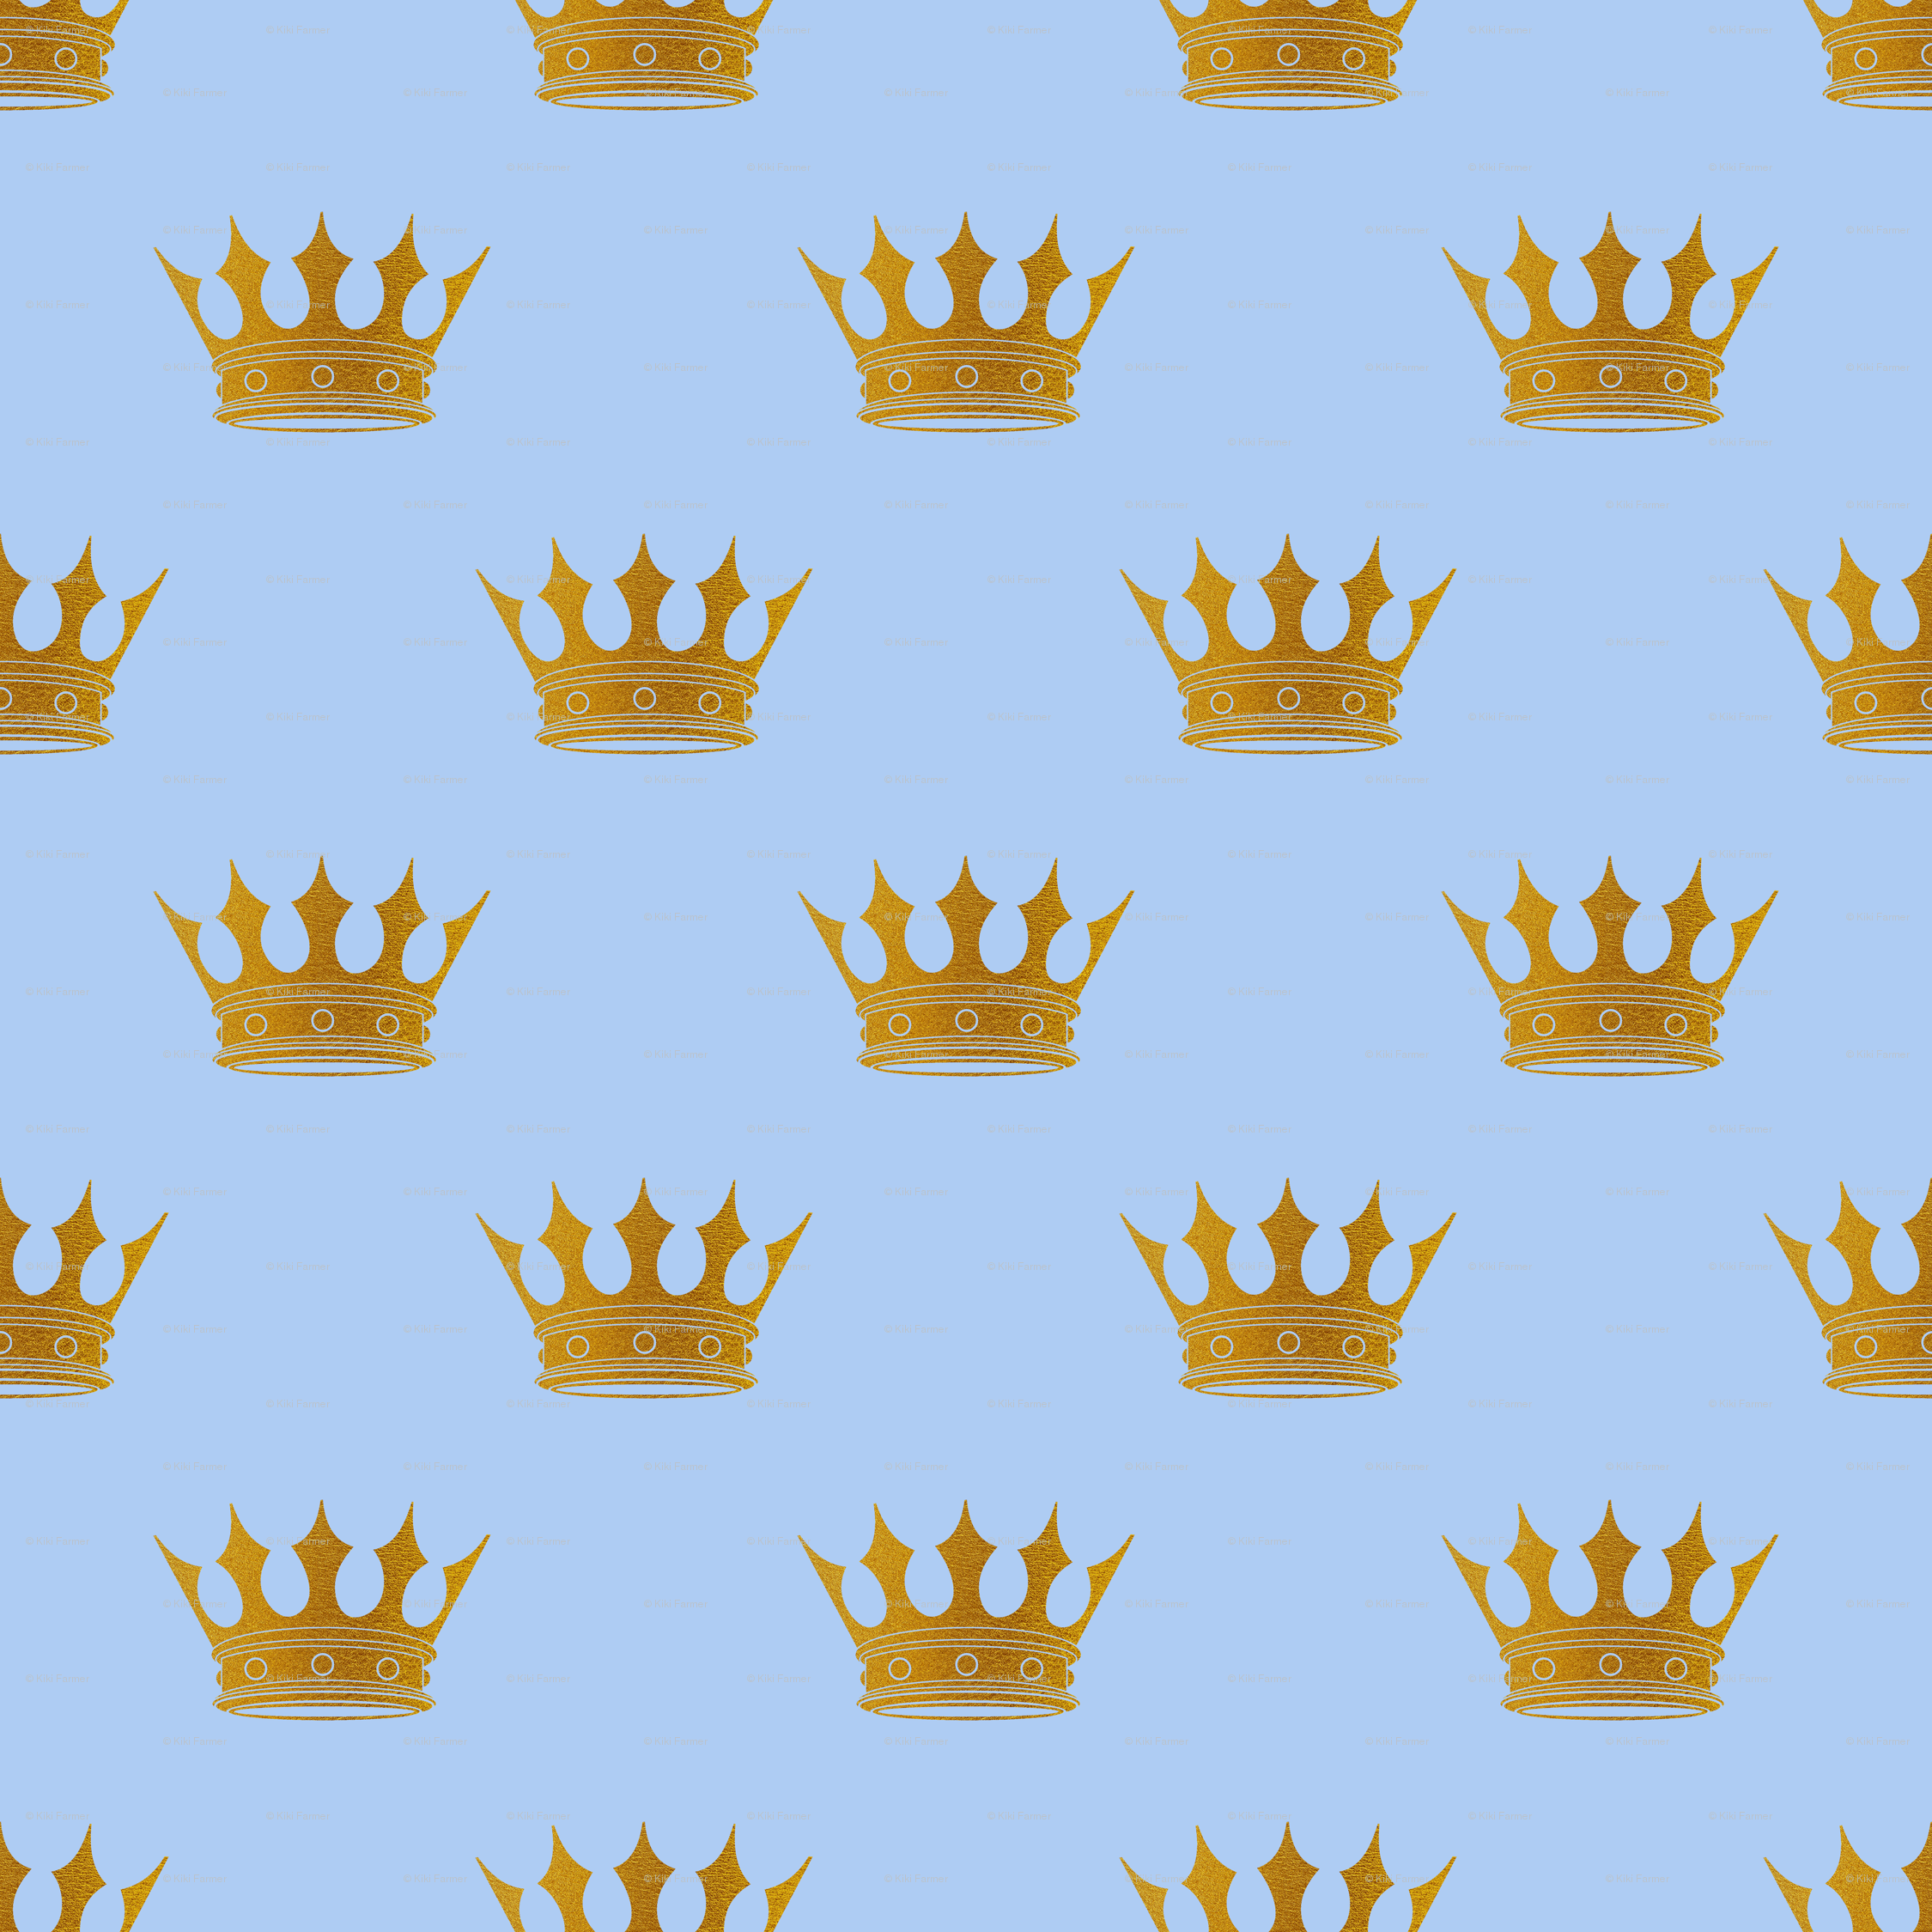 Prince Crown Images Wallpapers